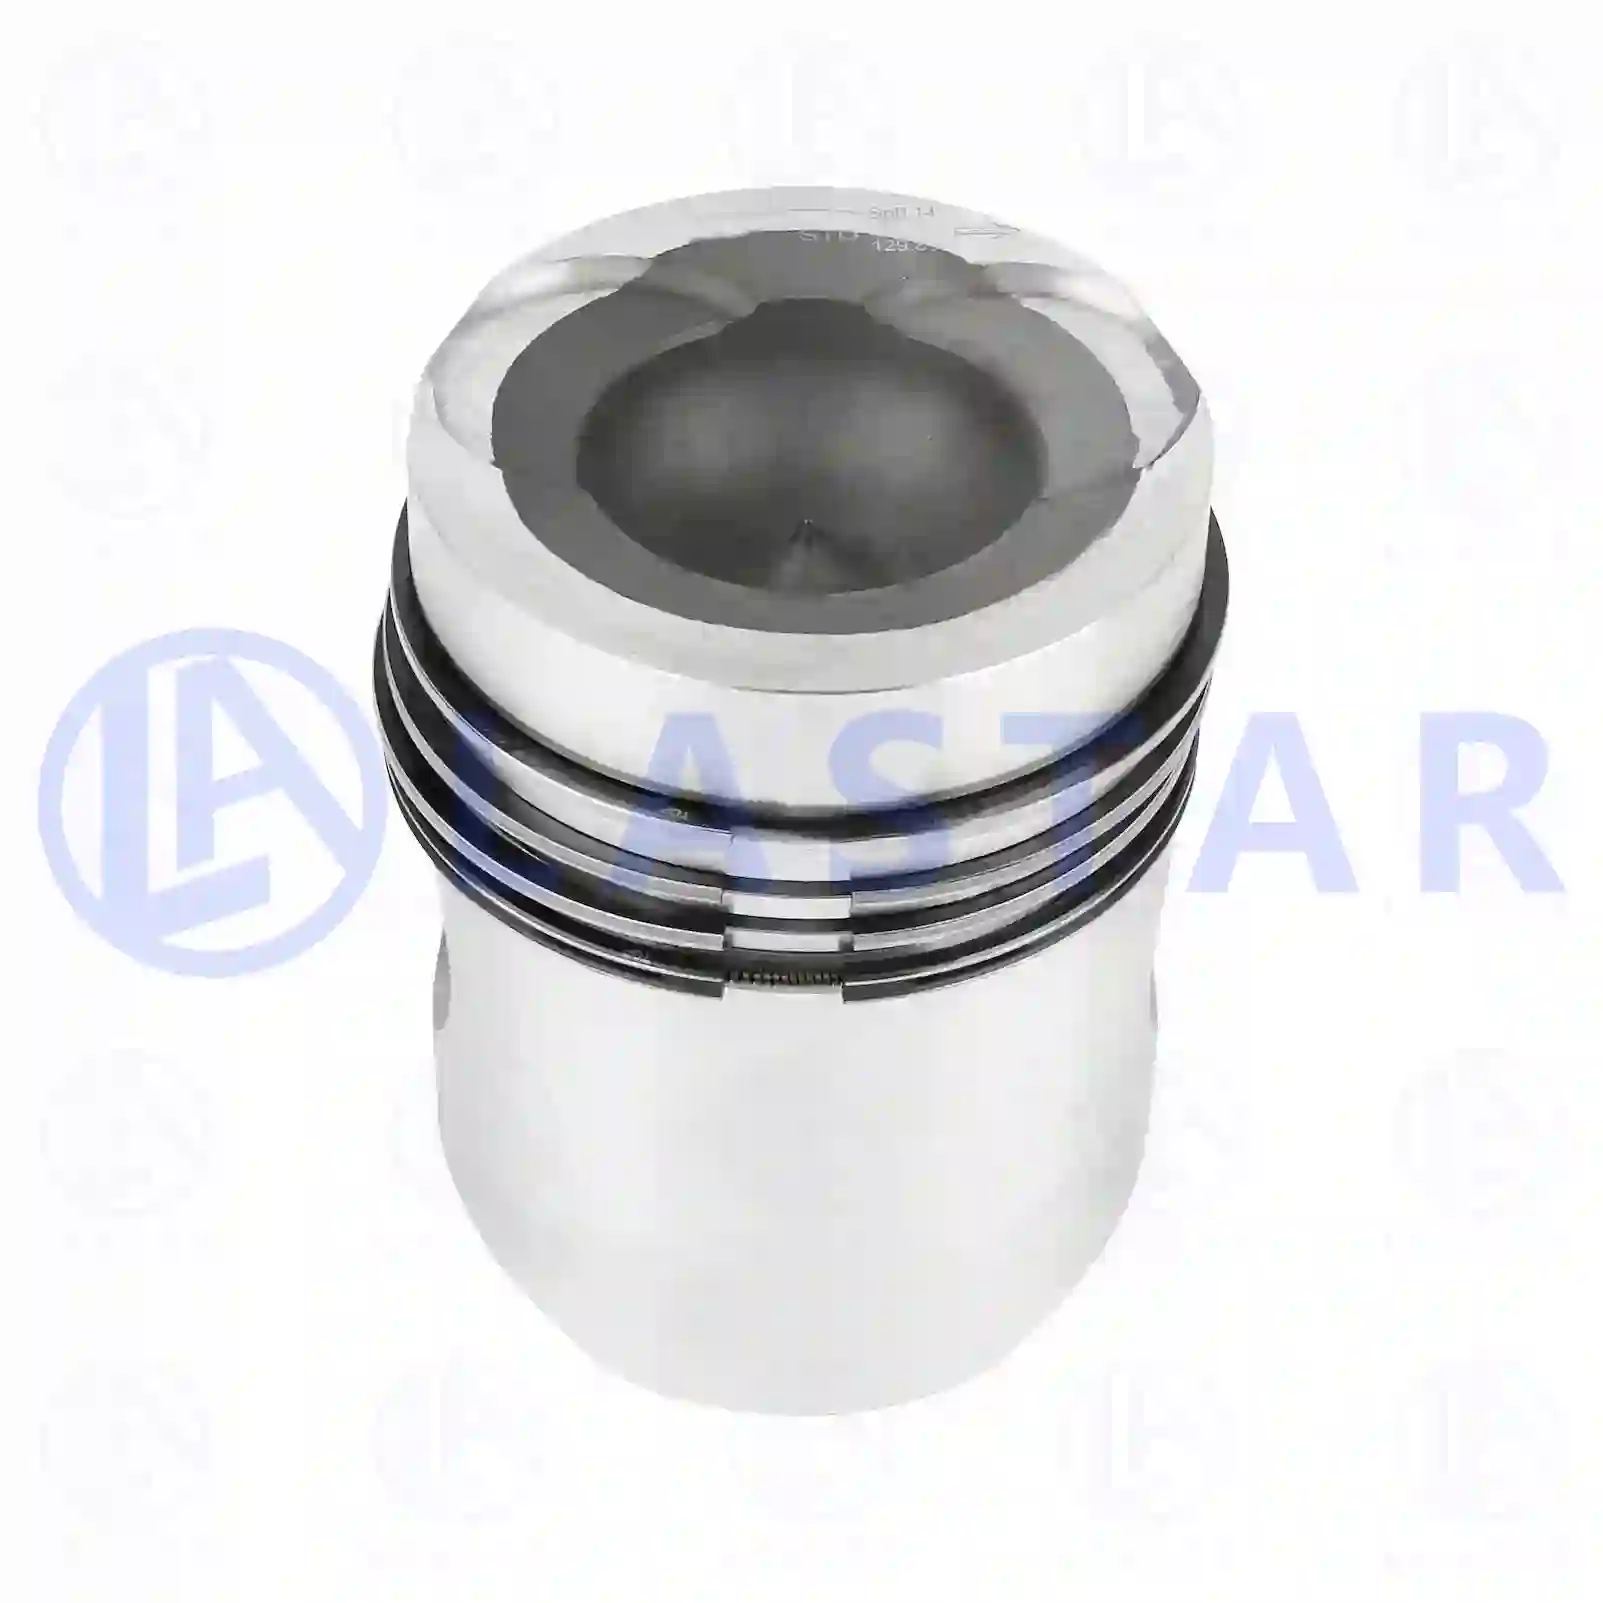 Piston, complete with rings, 77700216, 0681210, 0682072, 0683165, 356893, 681210, 682072, 682074, 683165, 683567 ||  77700216 Lastar Spare Part | Truck Spare Parts, Auotomotive Spare Parts Piston, complete with rings, 77700216, 0681210, 0682072, 0683165, 356893, 681210, 682072, 682074, 683165, 683567 ||  77700216 Lastar Spare Part | Truck Spare Parts, Auotomotive Spare Parts